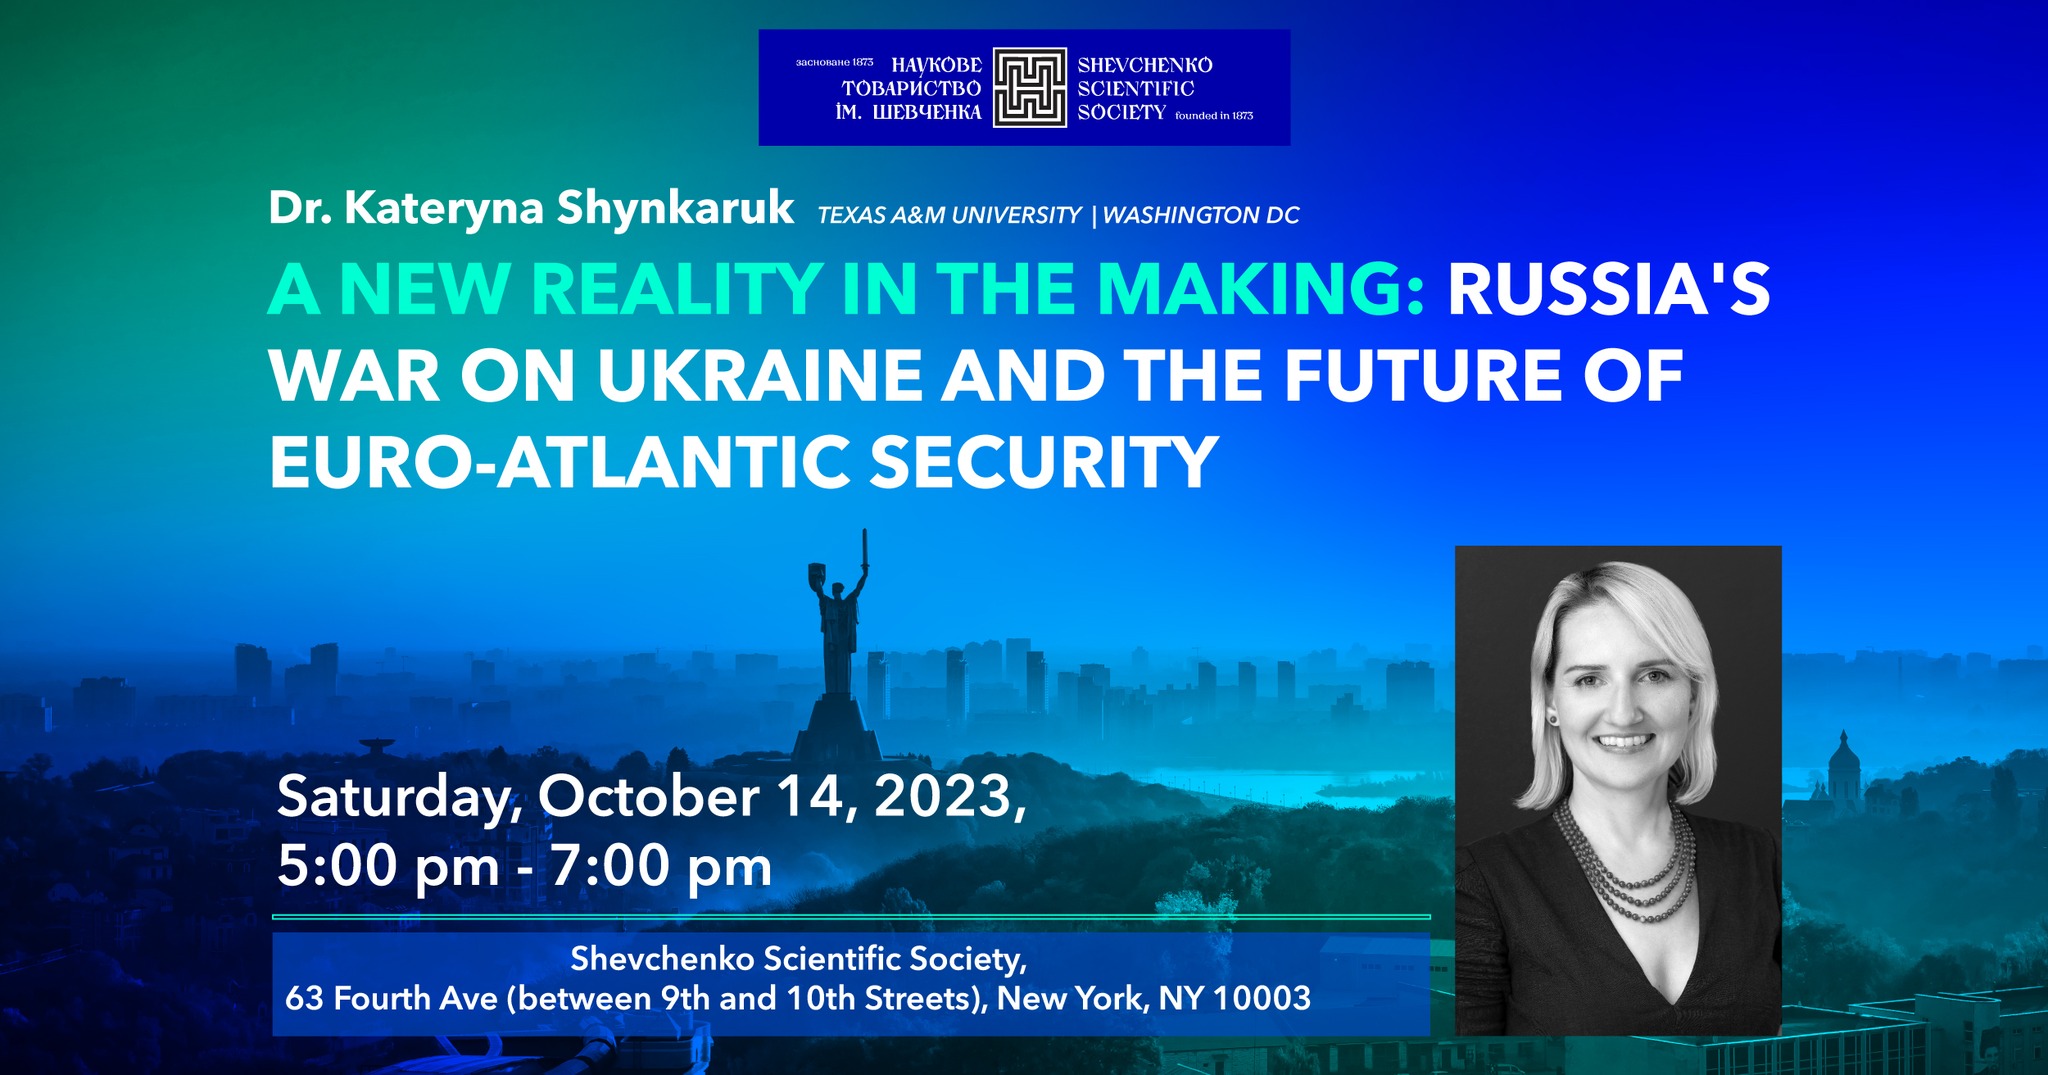 A New Reality in the Making: Russia’s War on Ukraine and the Future of Euro-Atlantic Security